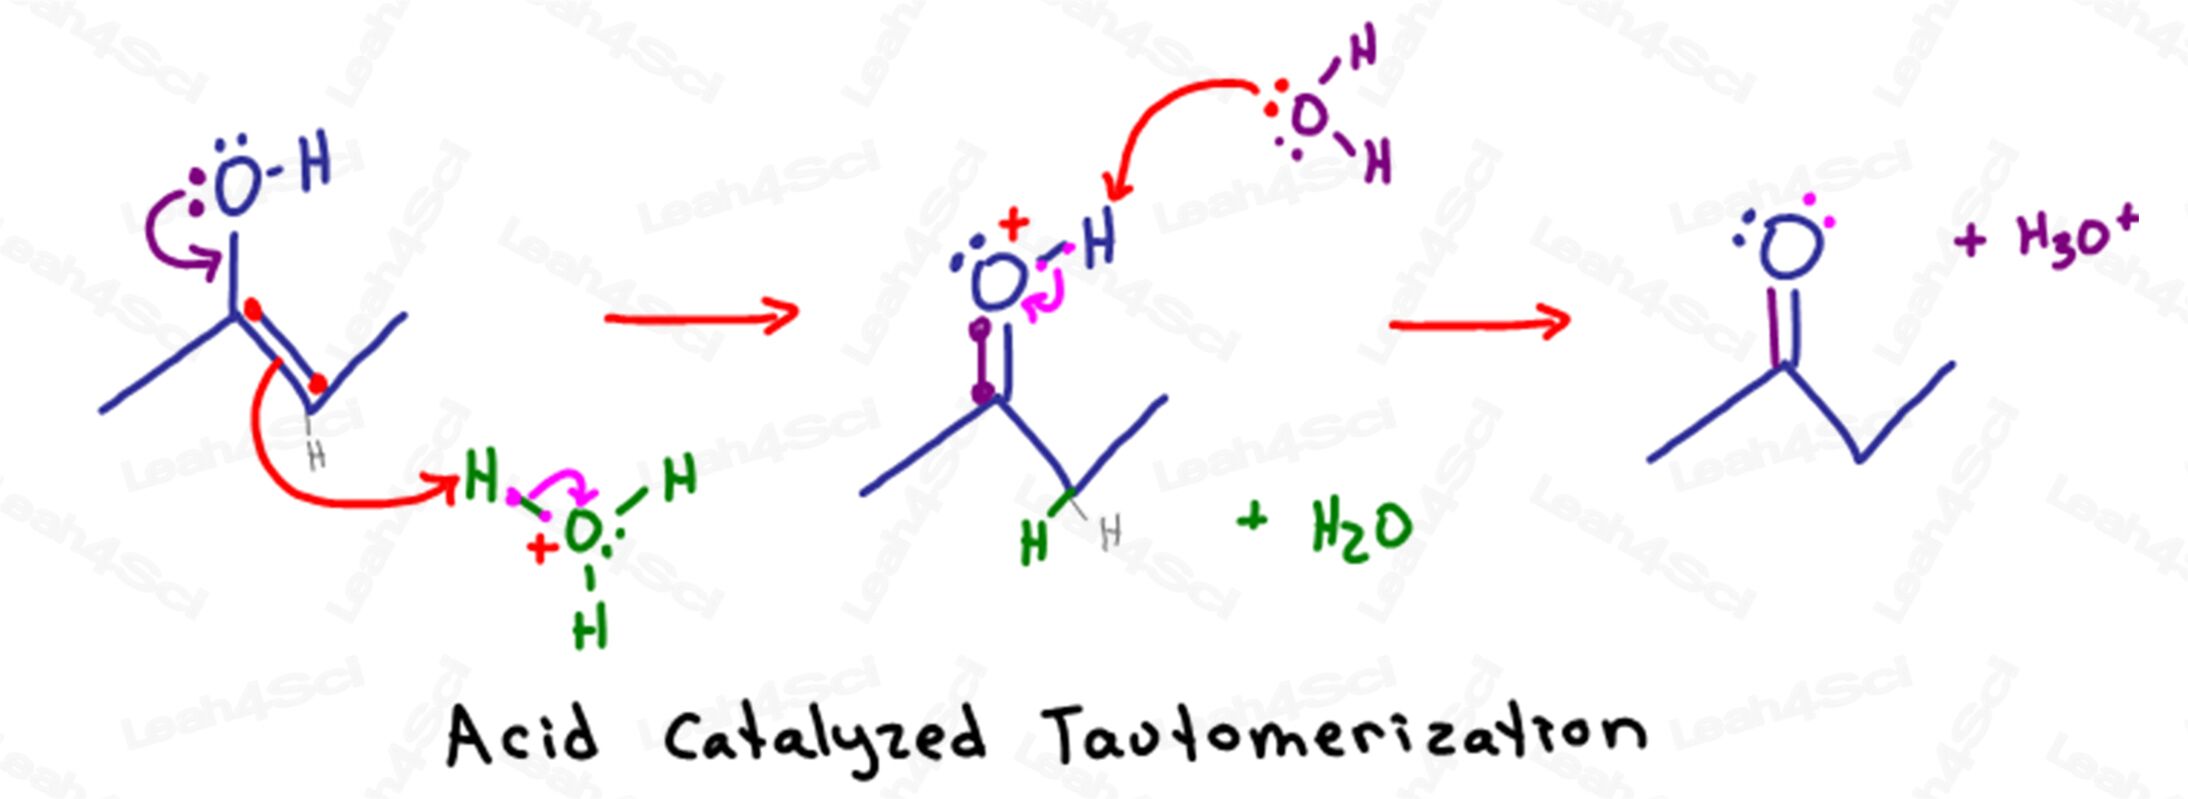 Tautomerization reaction mechanism in acid solution by Leah4sci